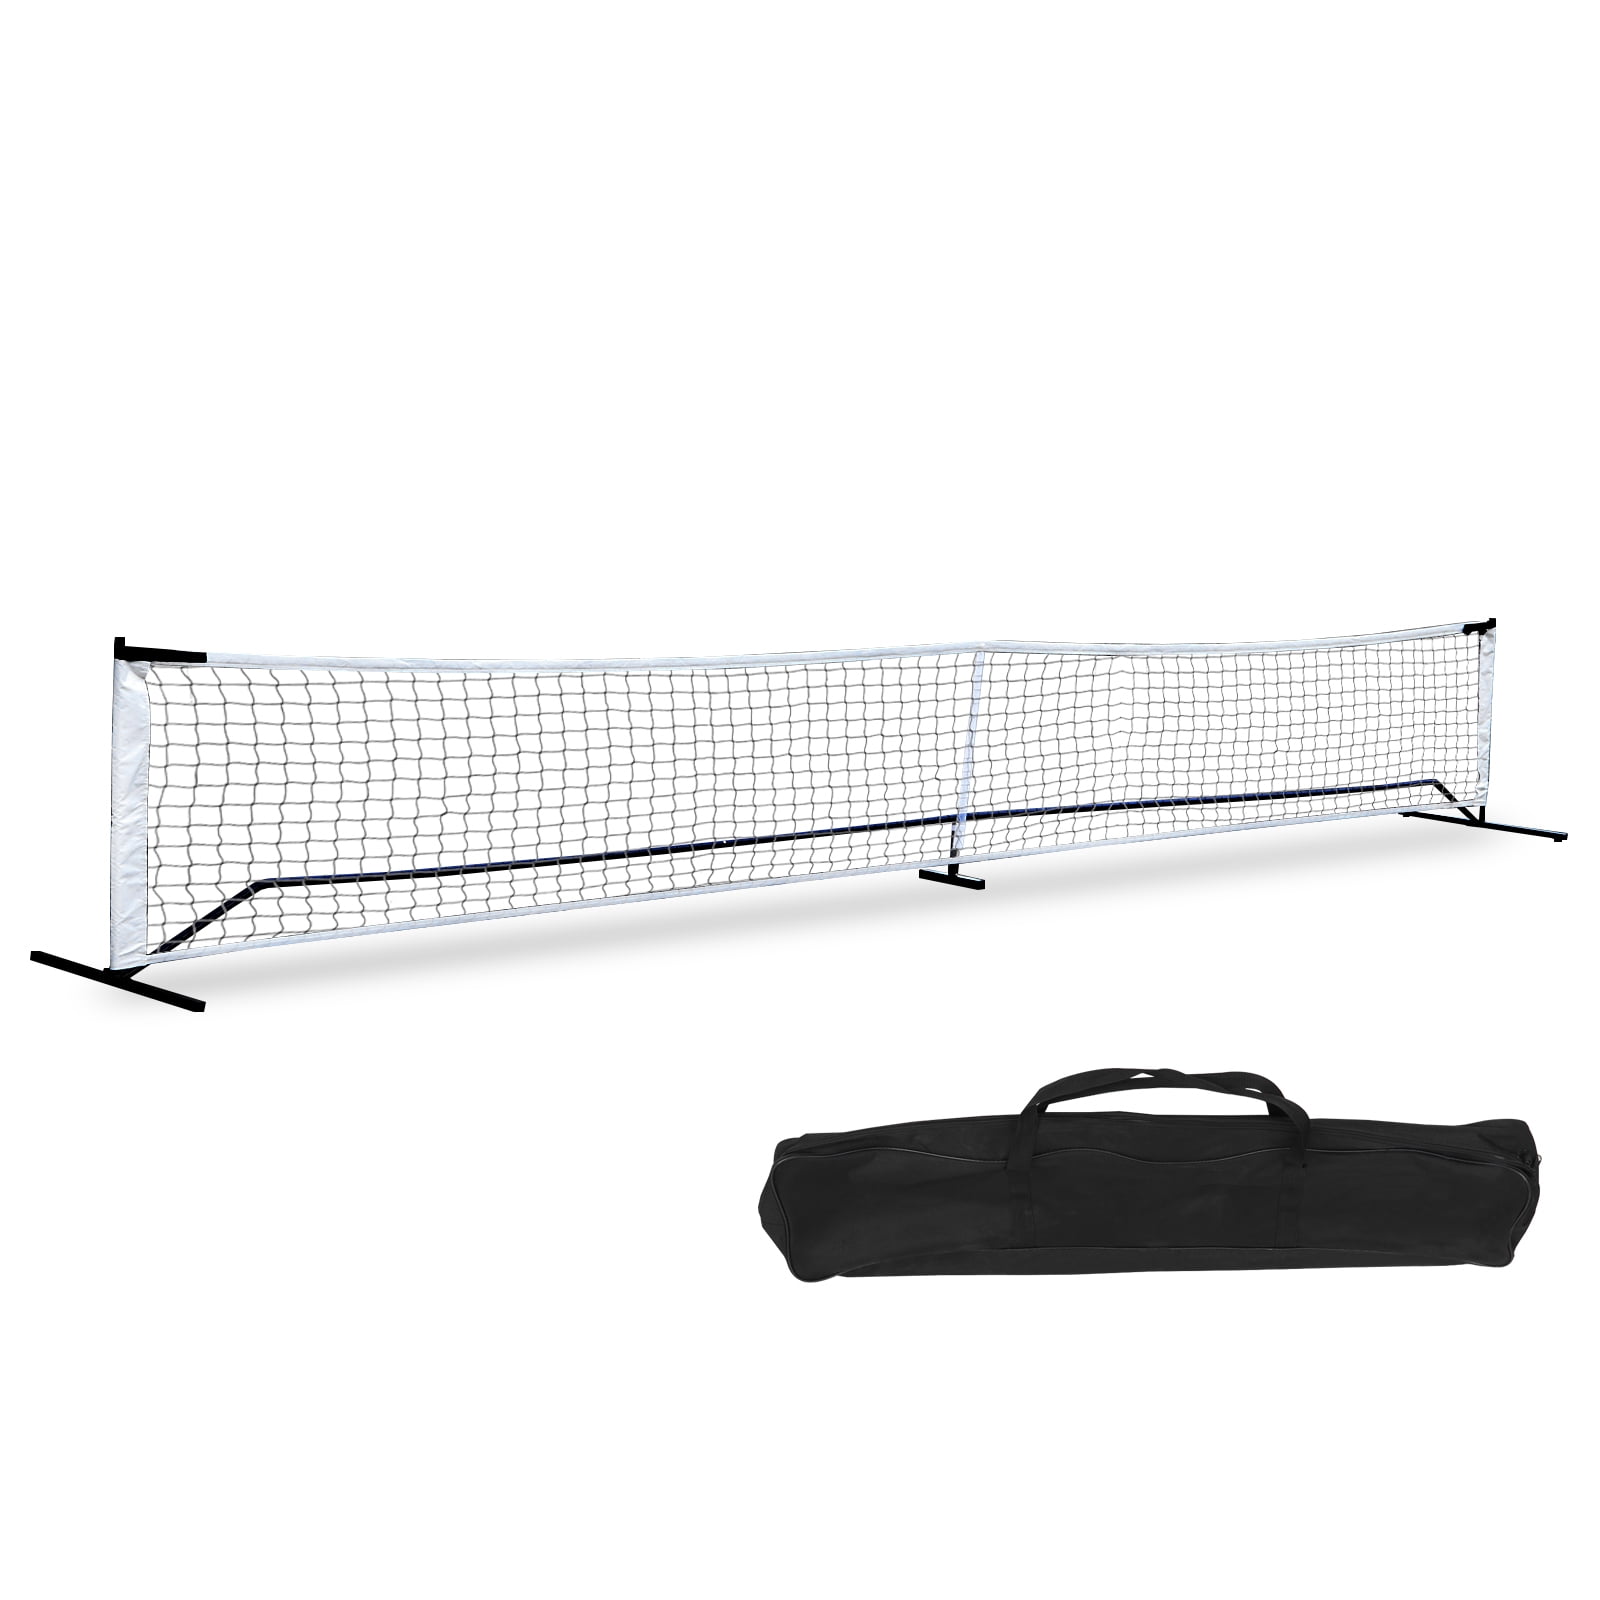 Details about   Pickleball Tennis Net W/Stand Net Carry Bag Steel Poles Outdoor 22FT Portable